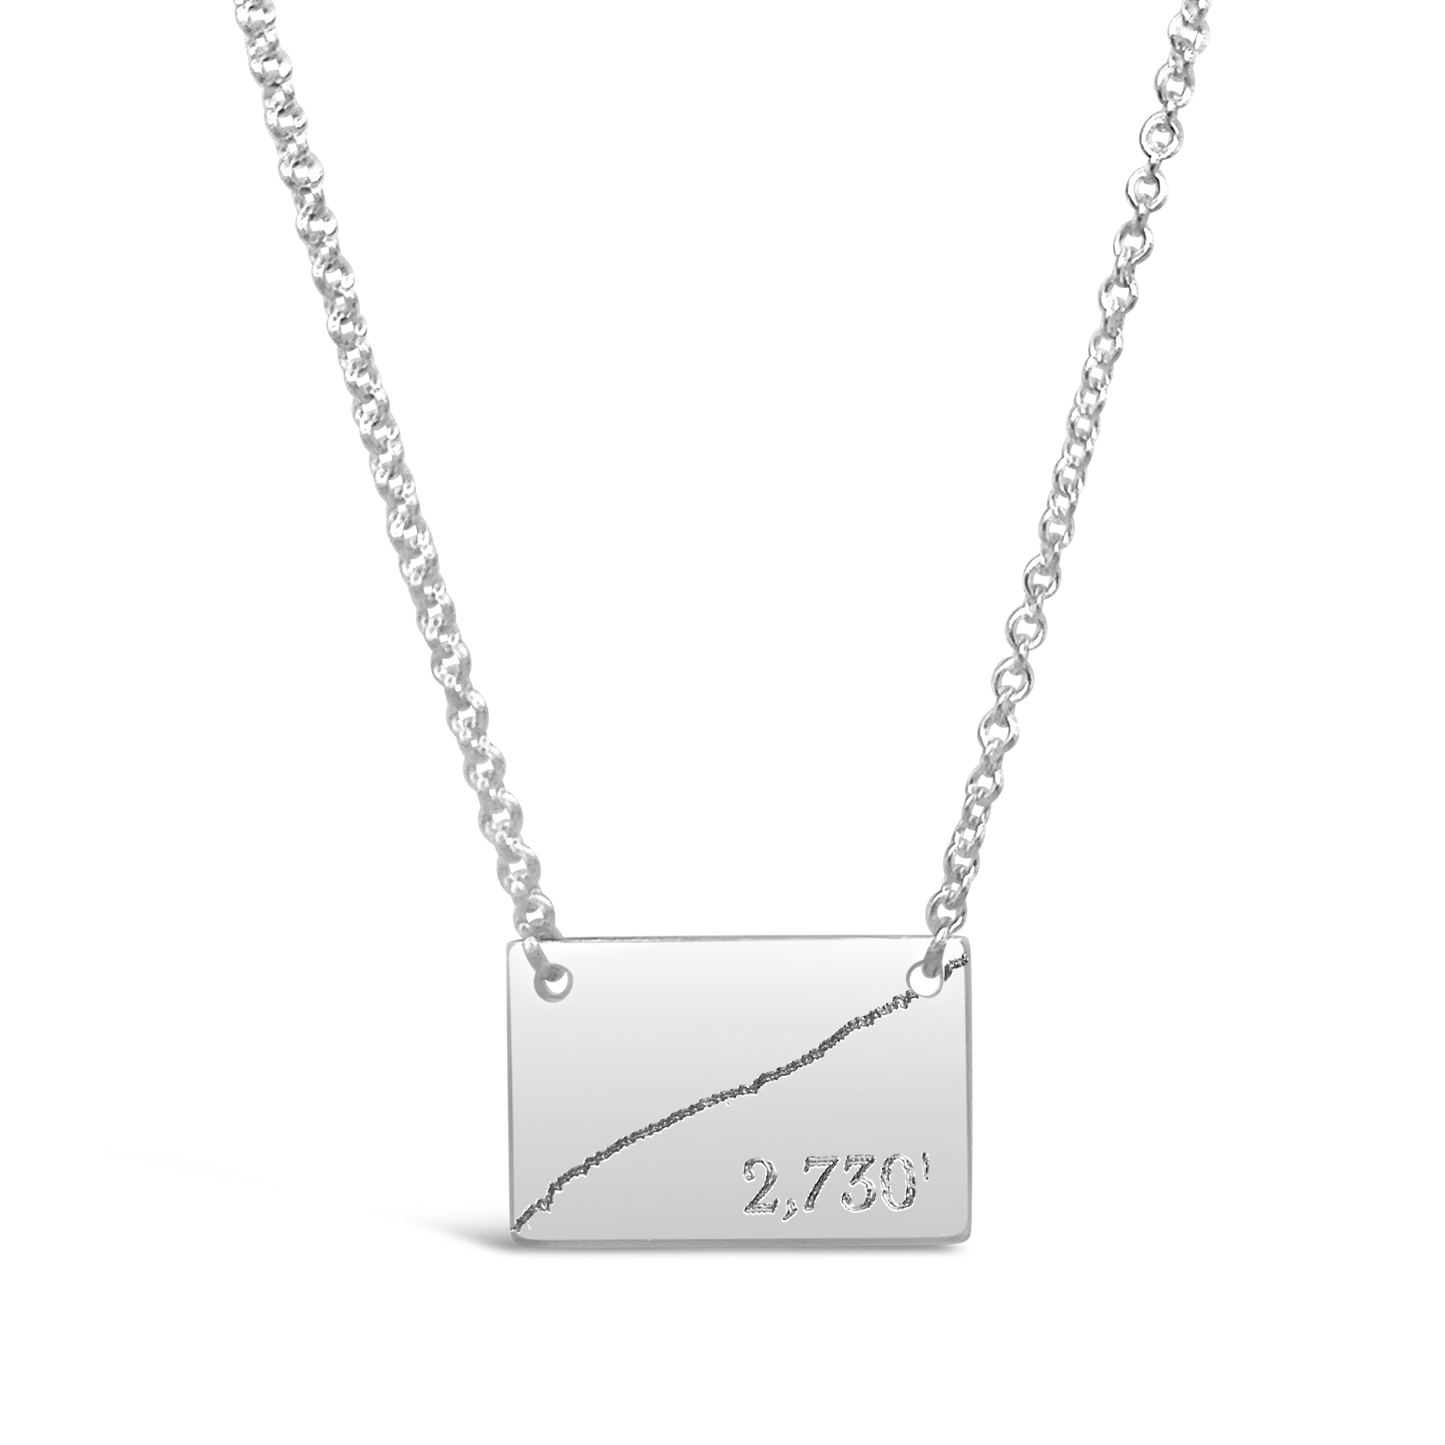 Lefthand Canyon Necklace - Silver